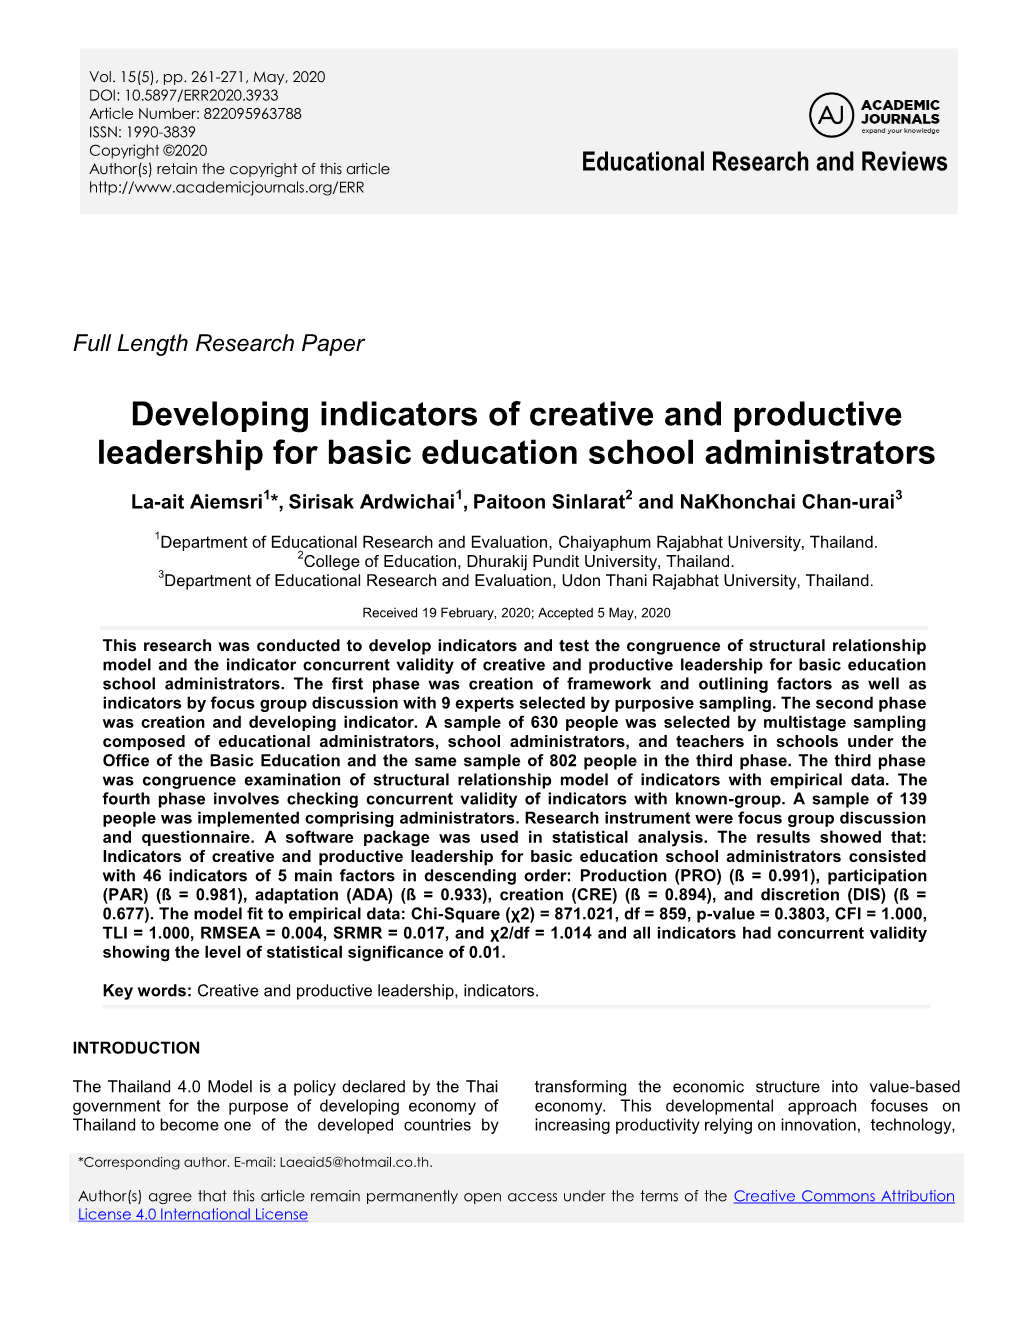 Developing Indicators of Creative and Productive Leadership for Basic Education School Administrators